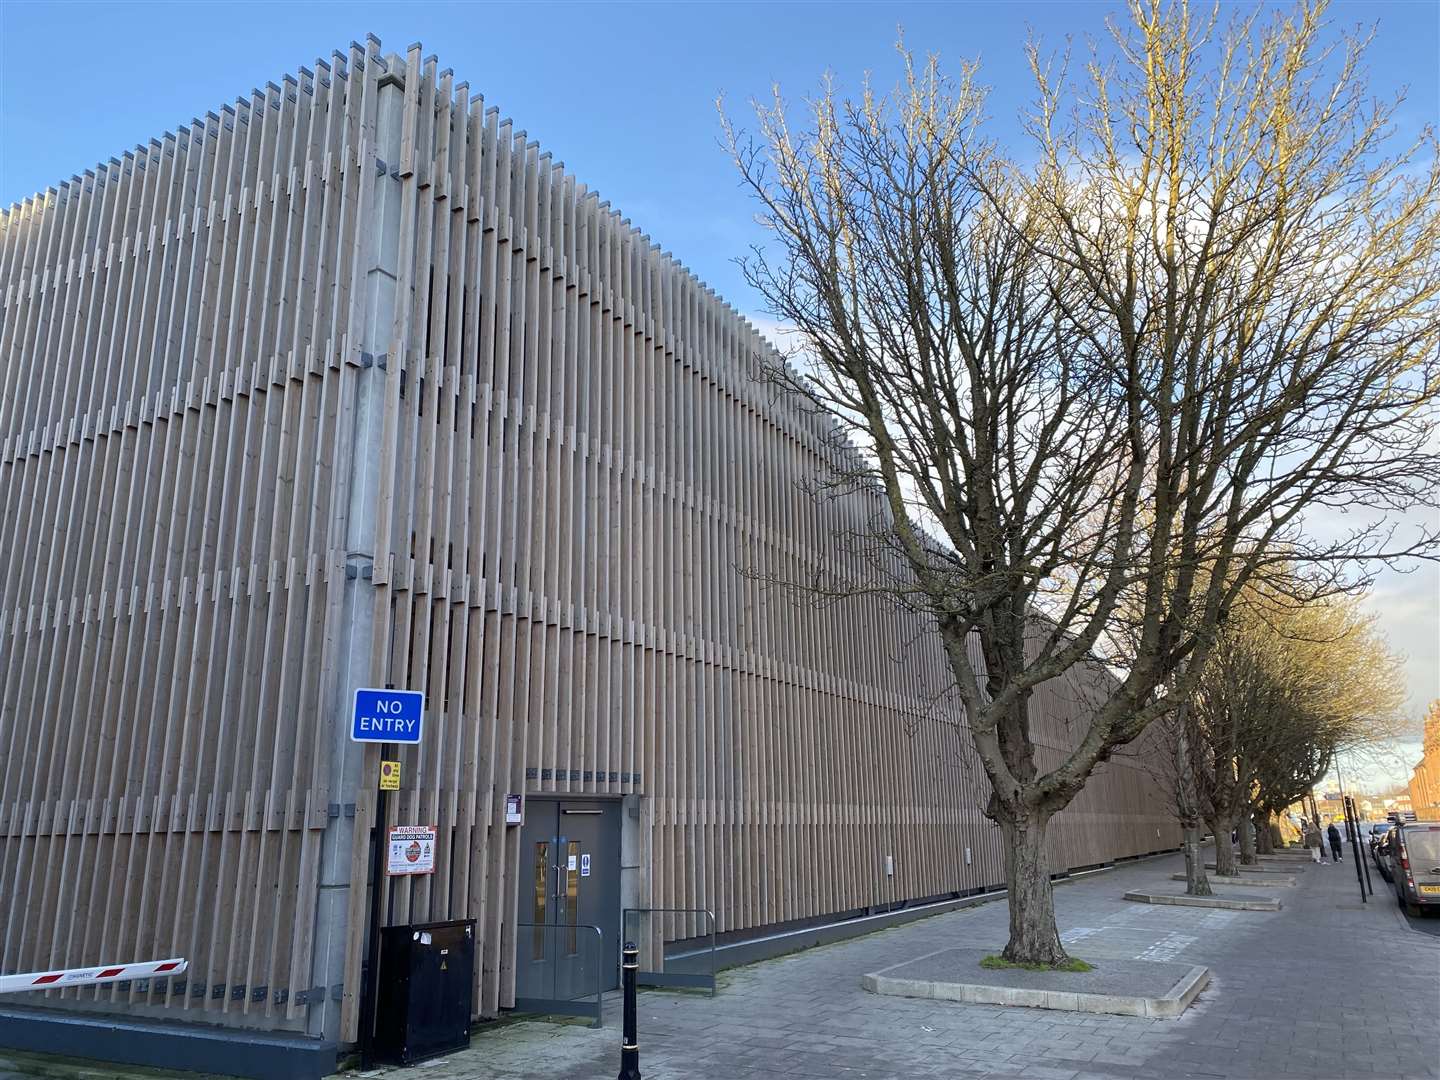 The Station Road West multi-storey car park in Canterbury was previously dubbed the city's "version of Brexit" due to its divisiveness